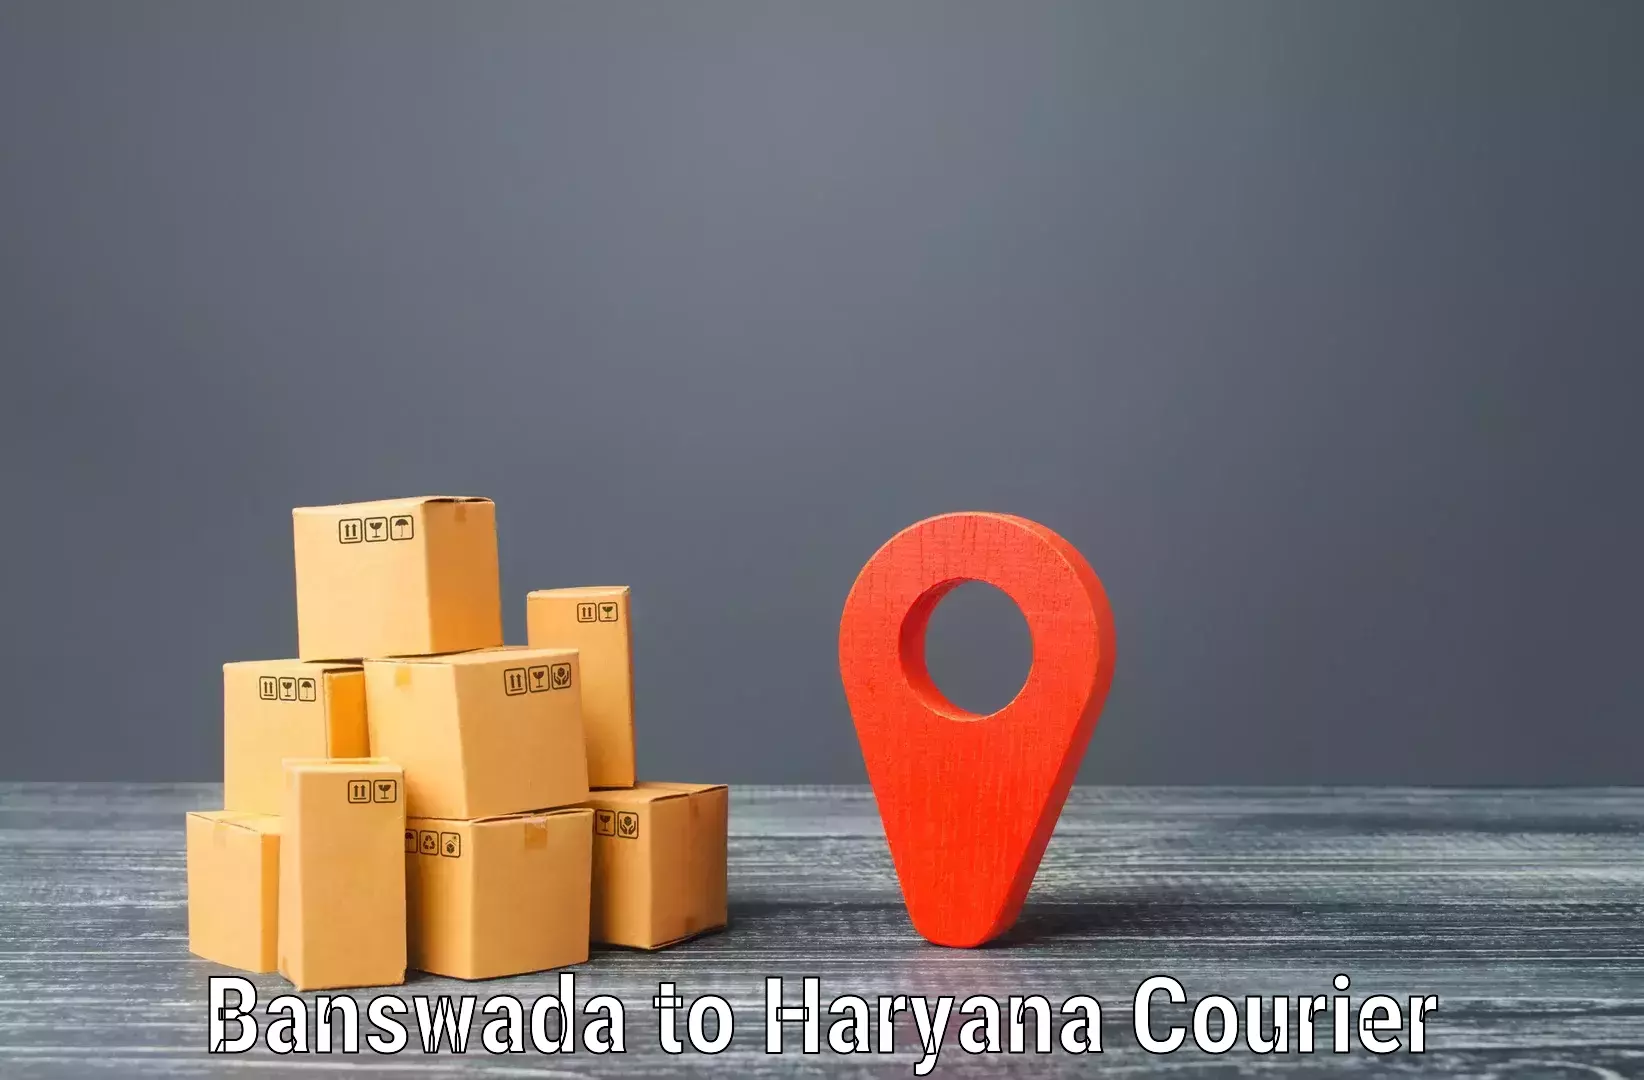 On-time delivery services in Banswada to Bilaspur Haryana